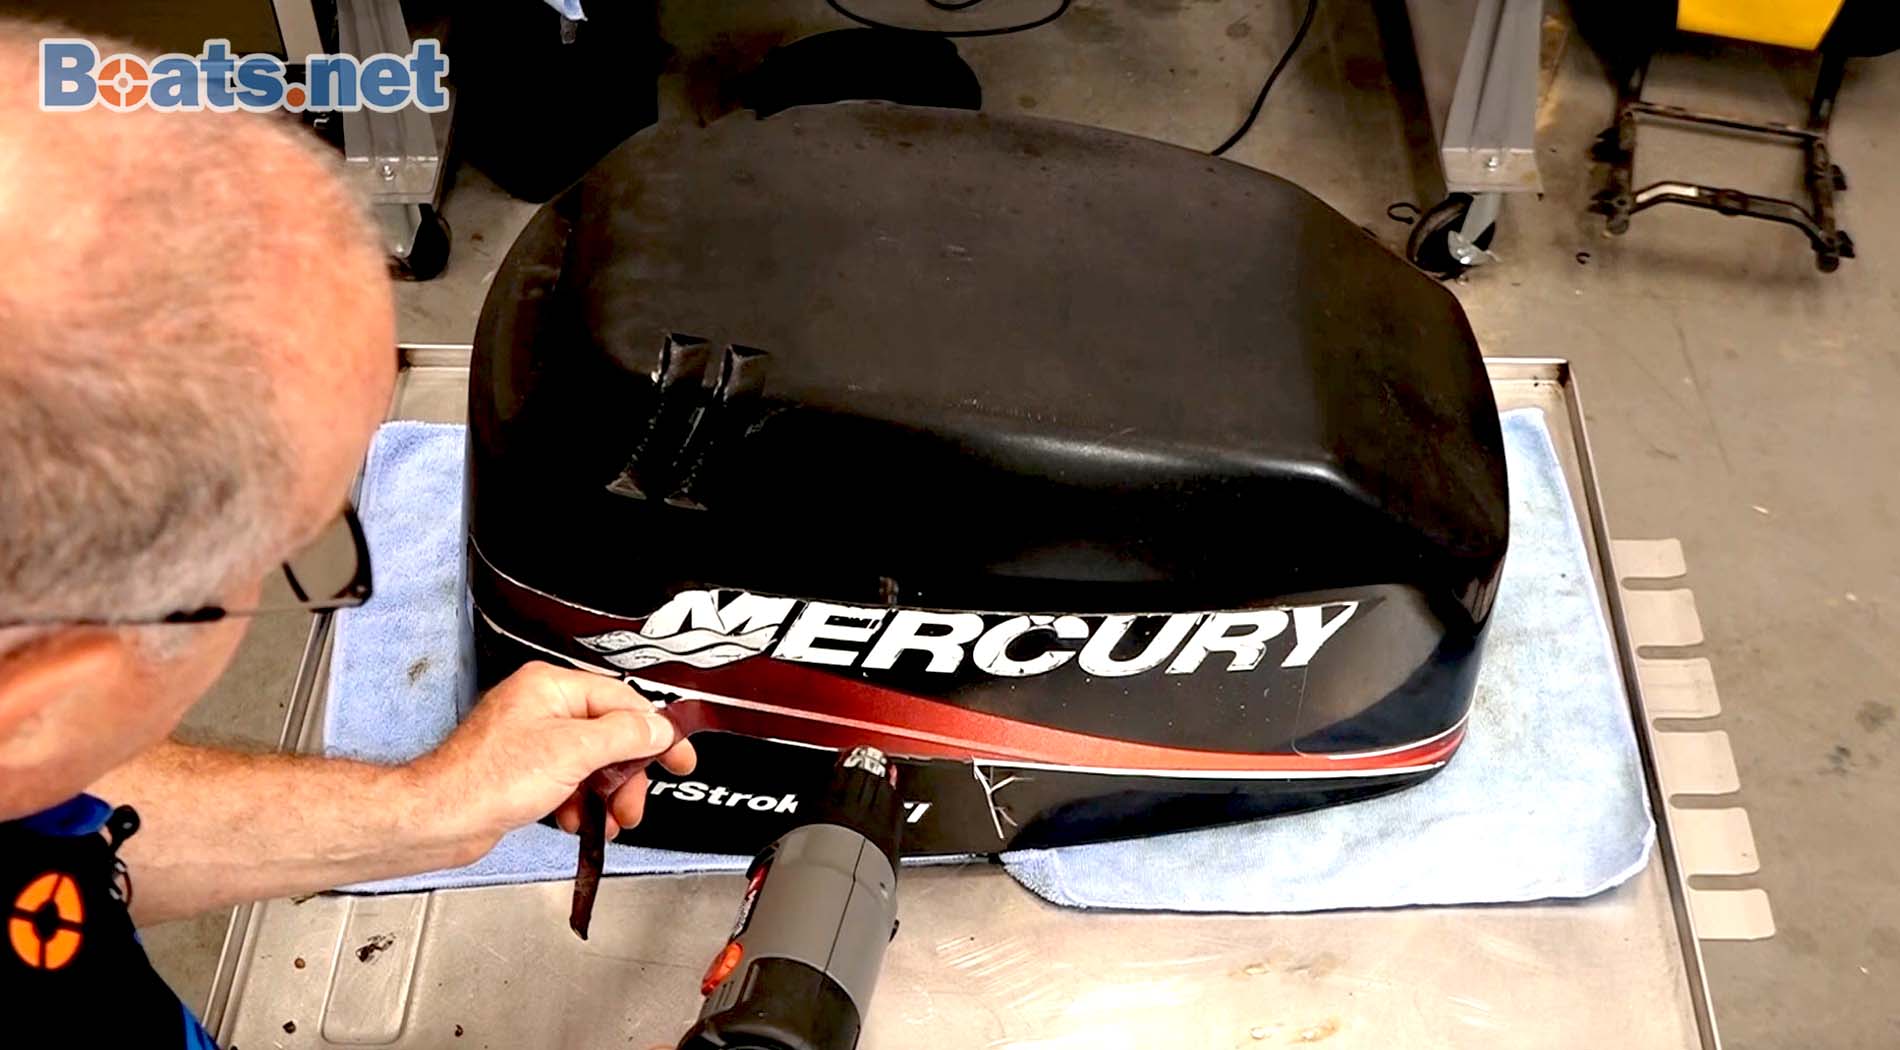 Mercury outboard engine decal removal